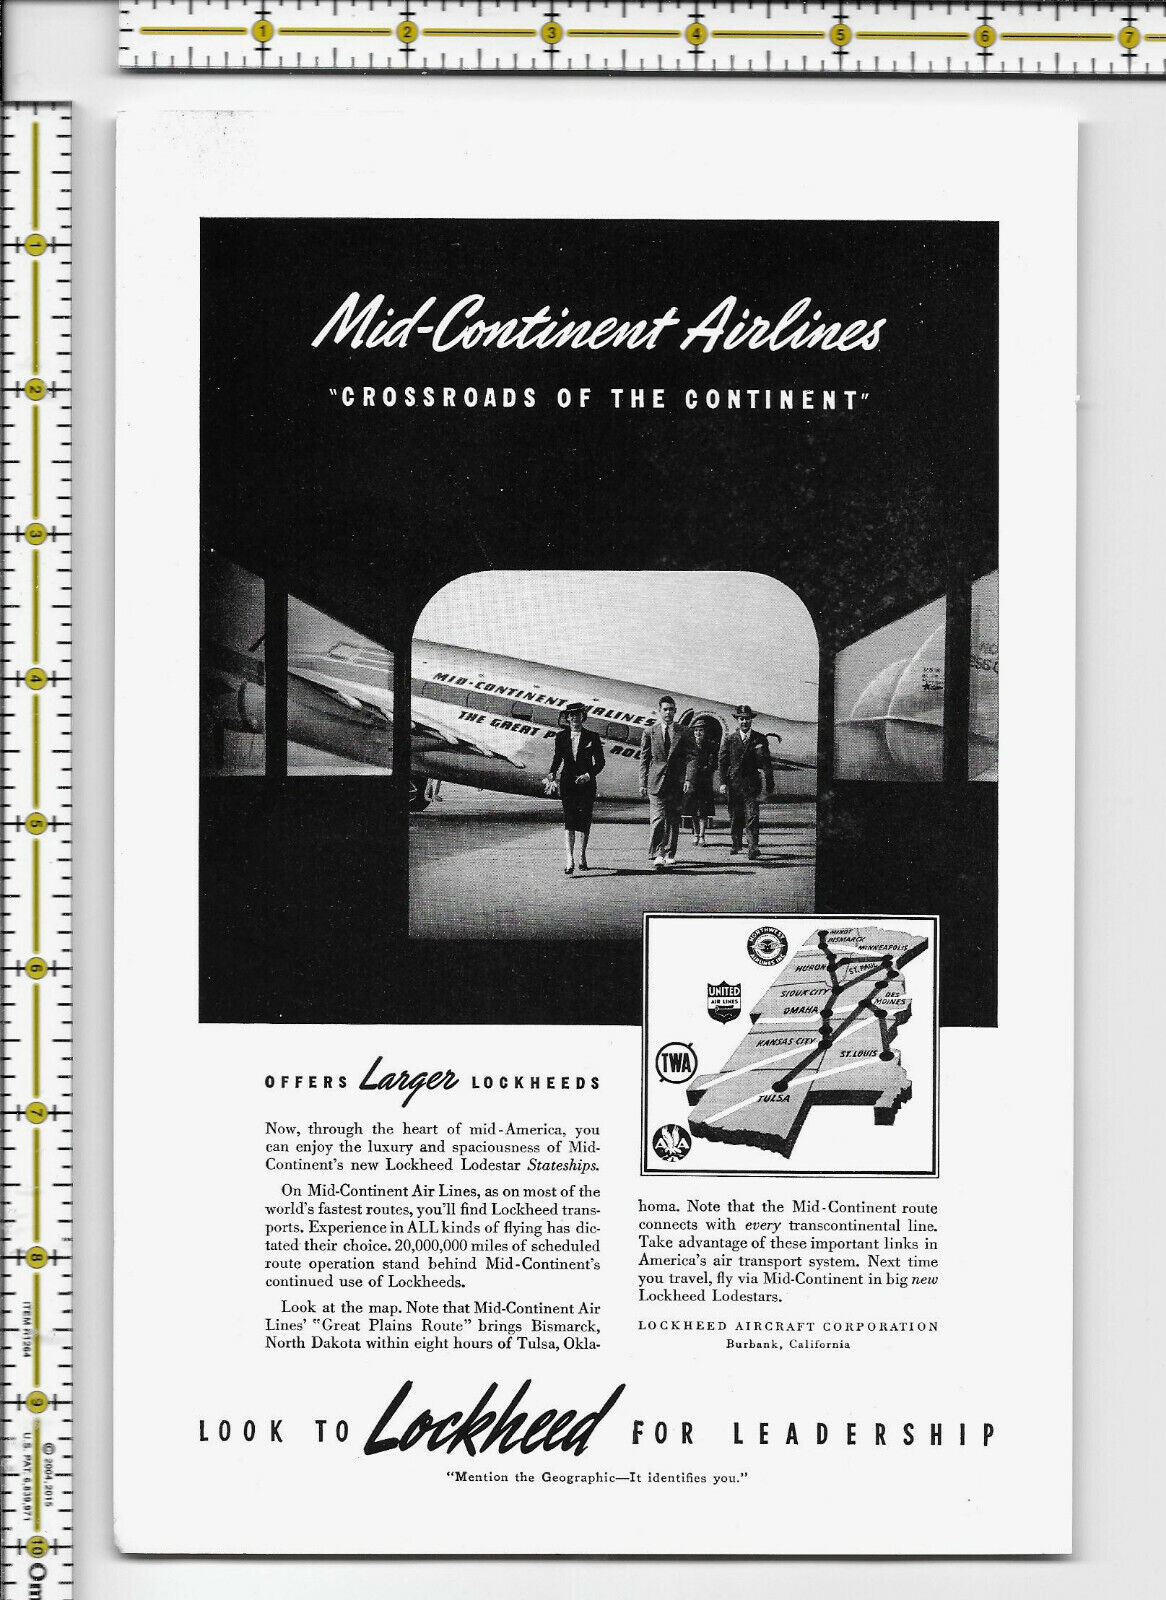 Lockheed Aircraft Corporation Mid-Continent Airlines 1940 magazine print ad